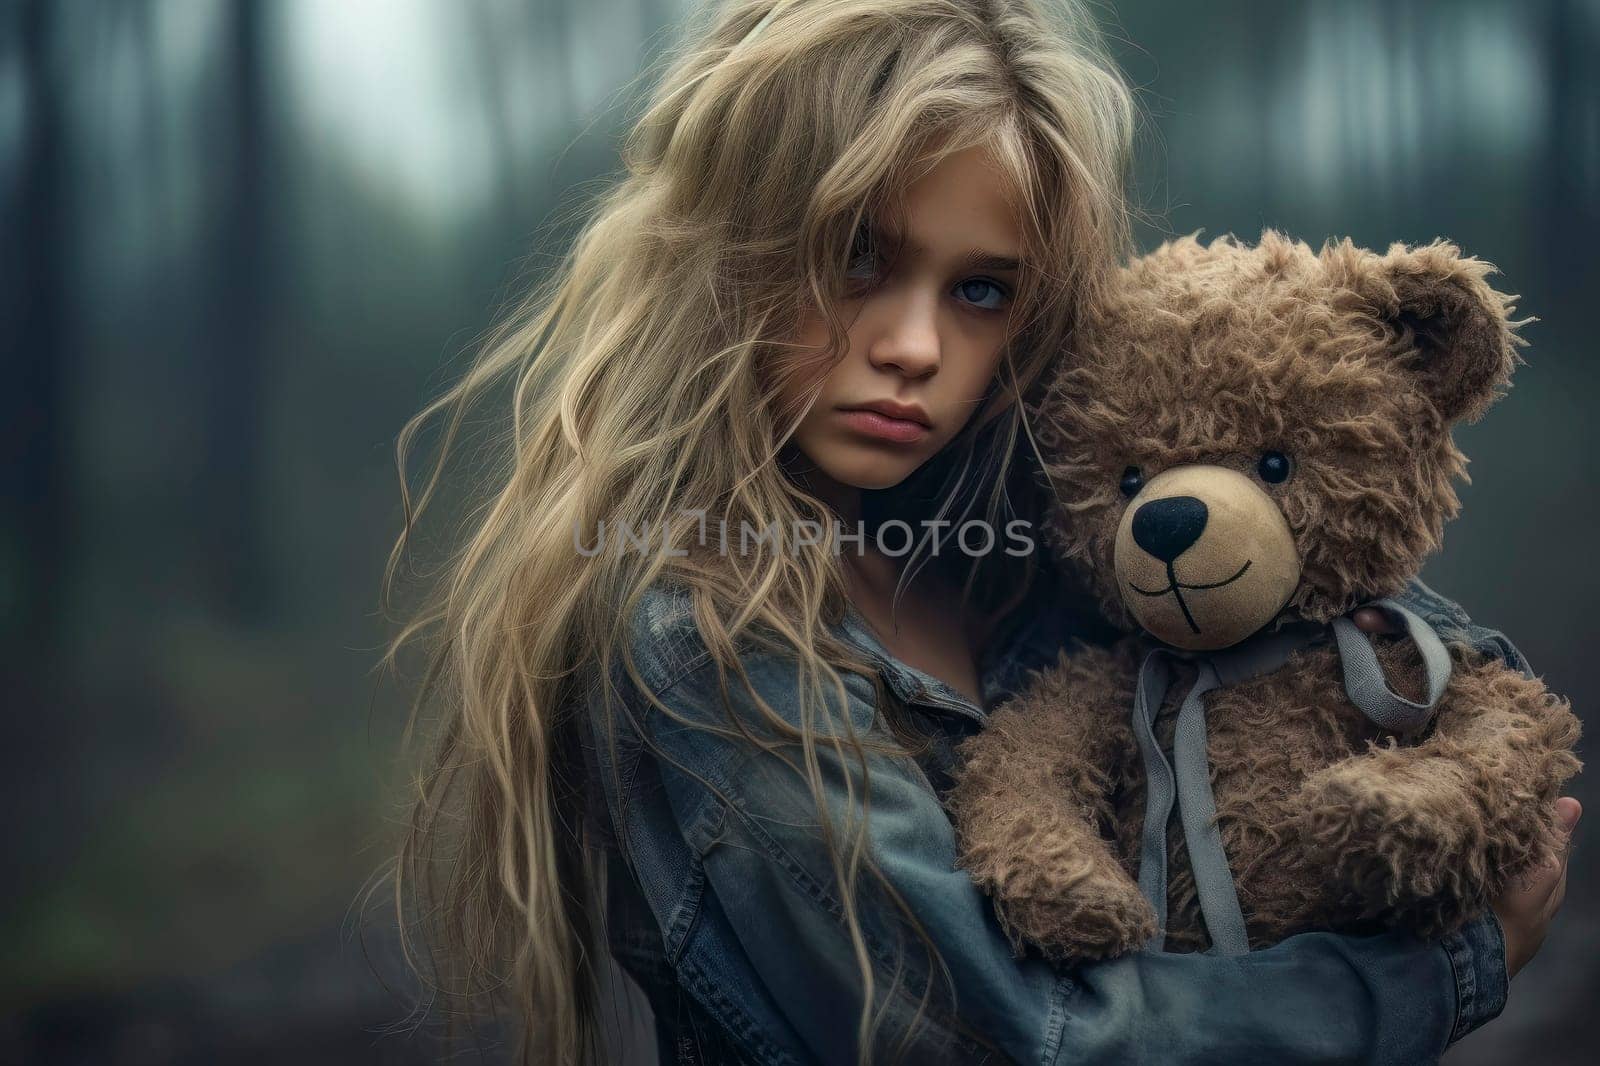 Seeking Comfort: Girl Embracing Teddy Bear for Solace by pippocarlot